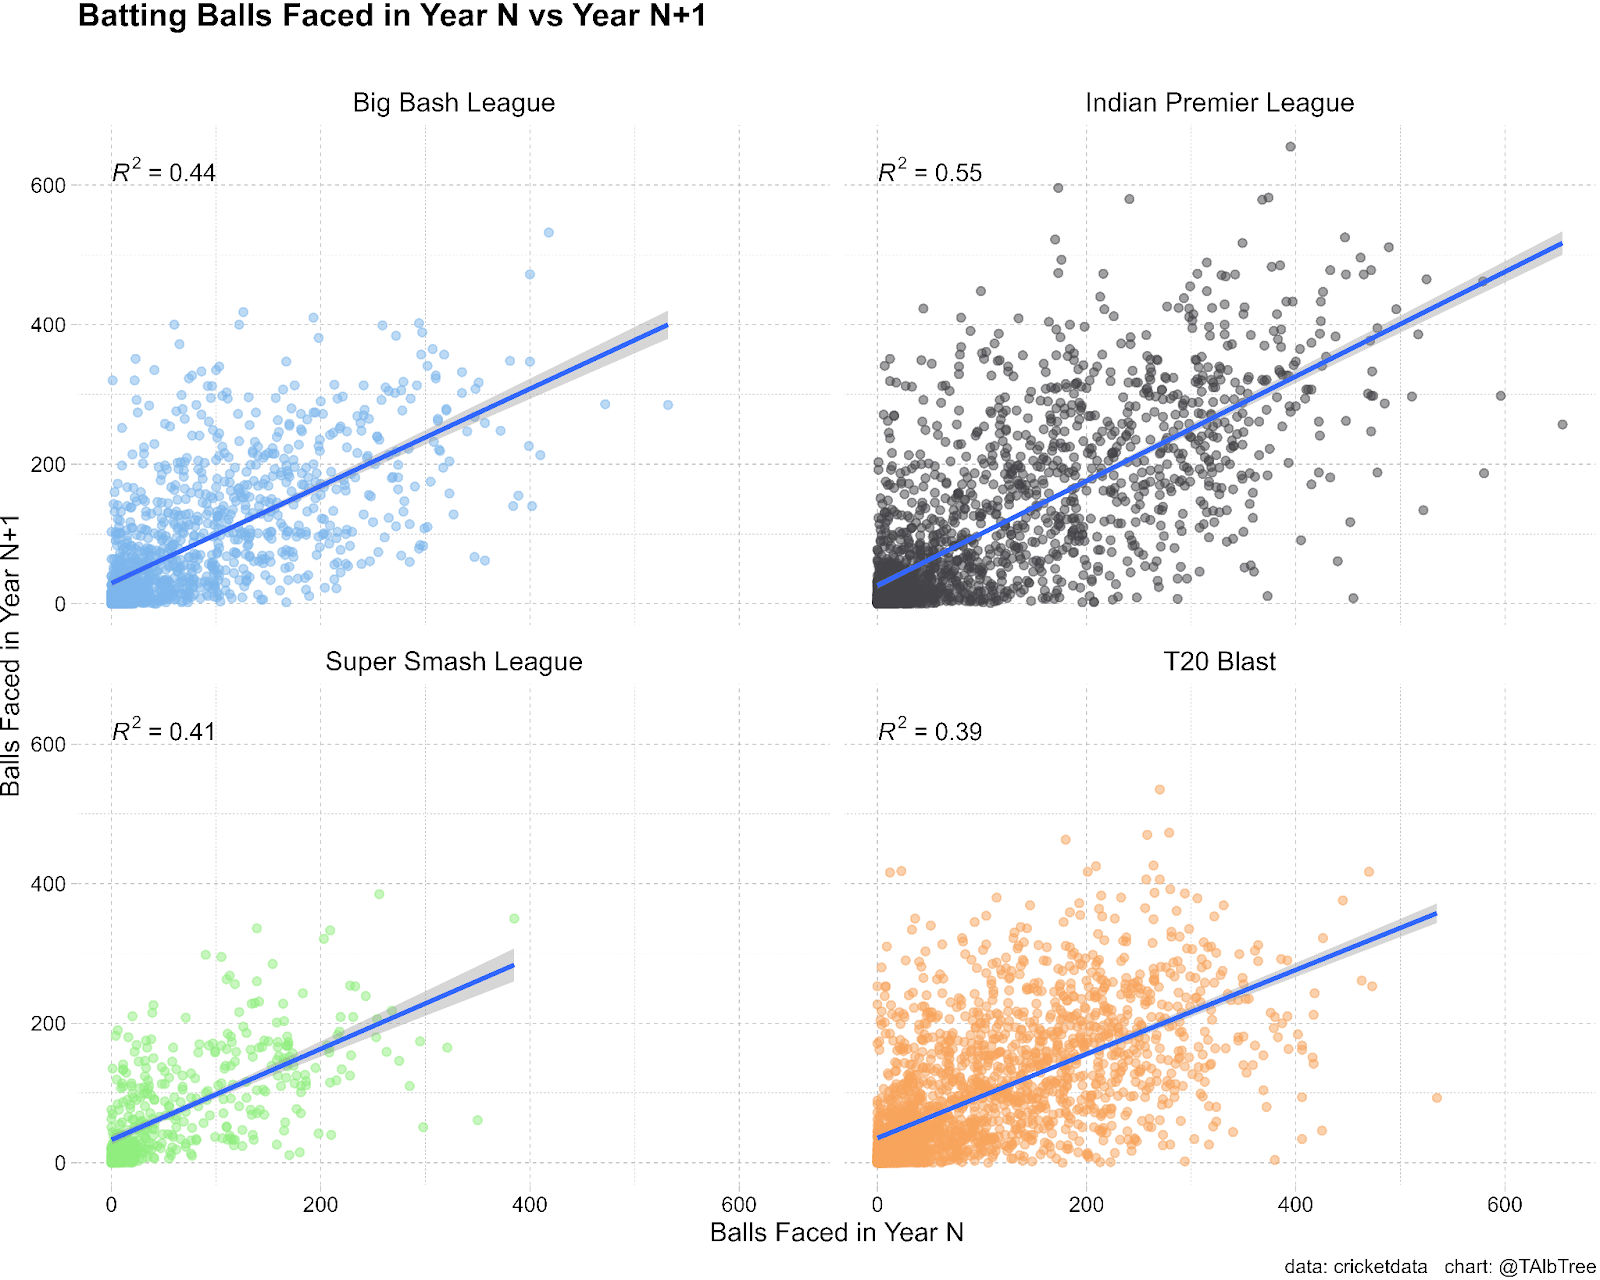 4 scatter plots of atting balls faced in year N and Year N +1 across the four major Twenty20 competitions that have played more than one year (Big Bash, Indian Premier League, Super Smash League, T20 Blast). R squared in IPL 0.55, T20 Blast 0.39, BBL 0.4, Super Smash League 0.41